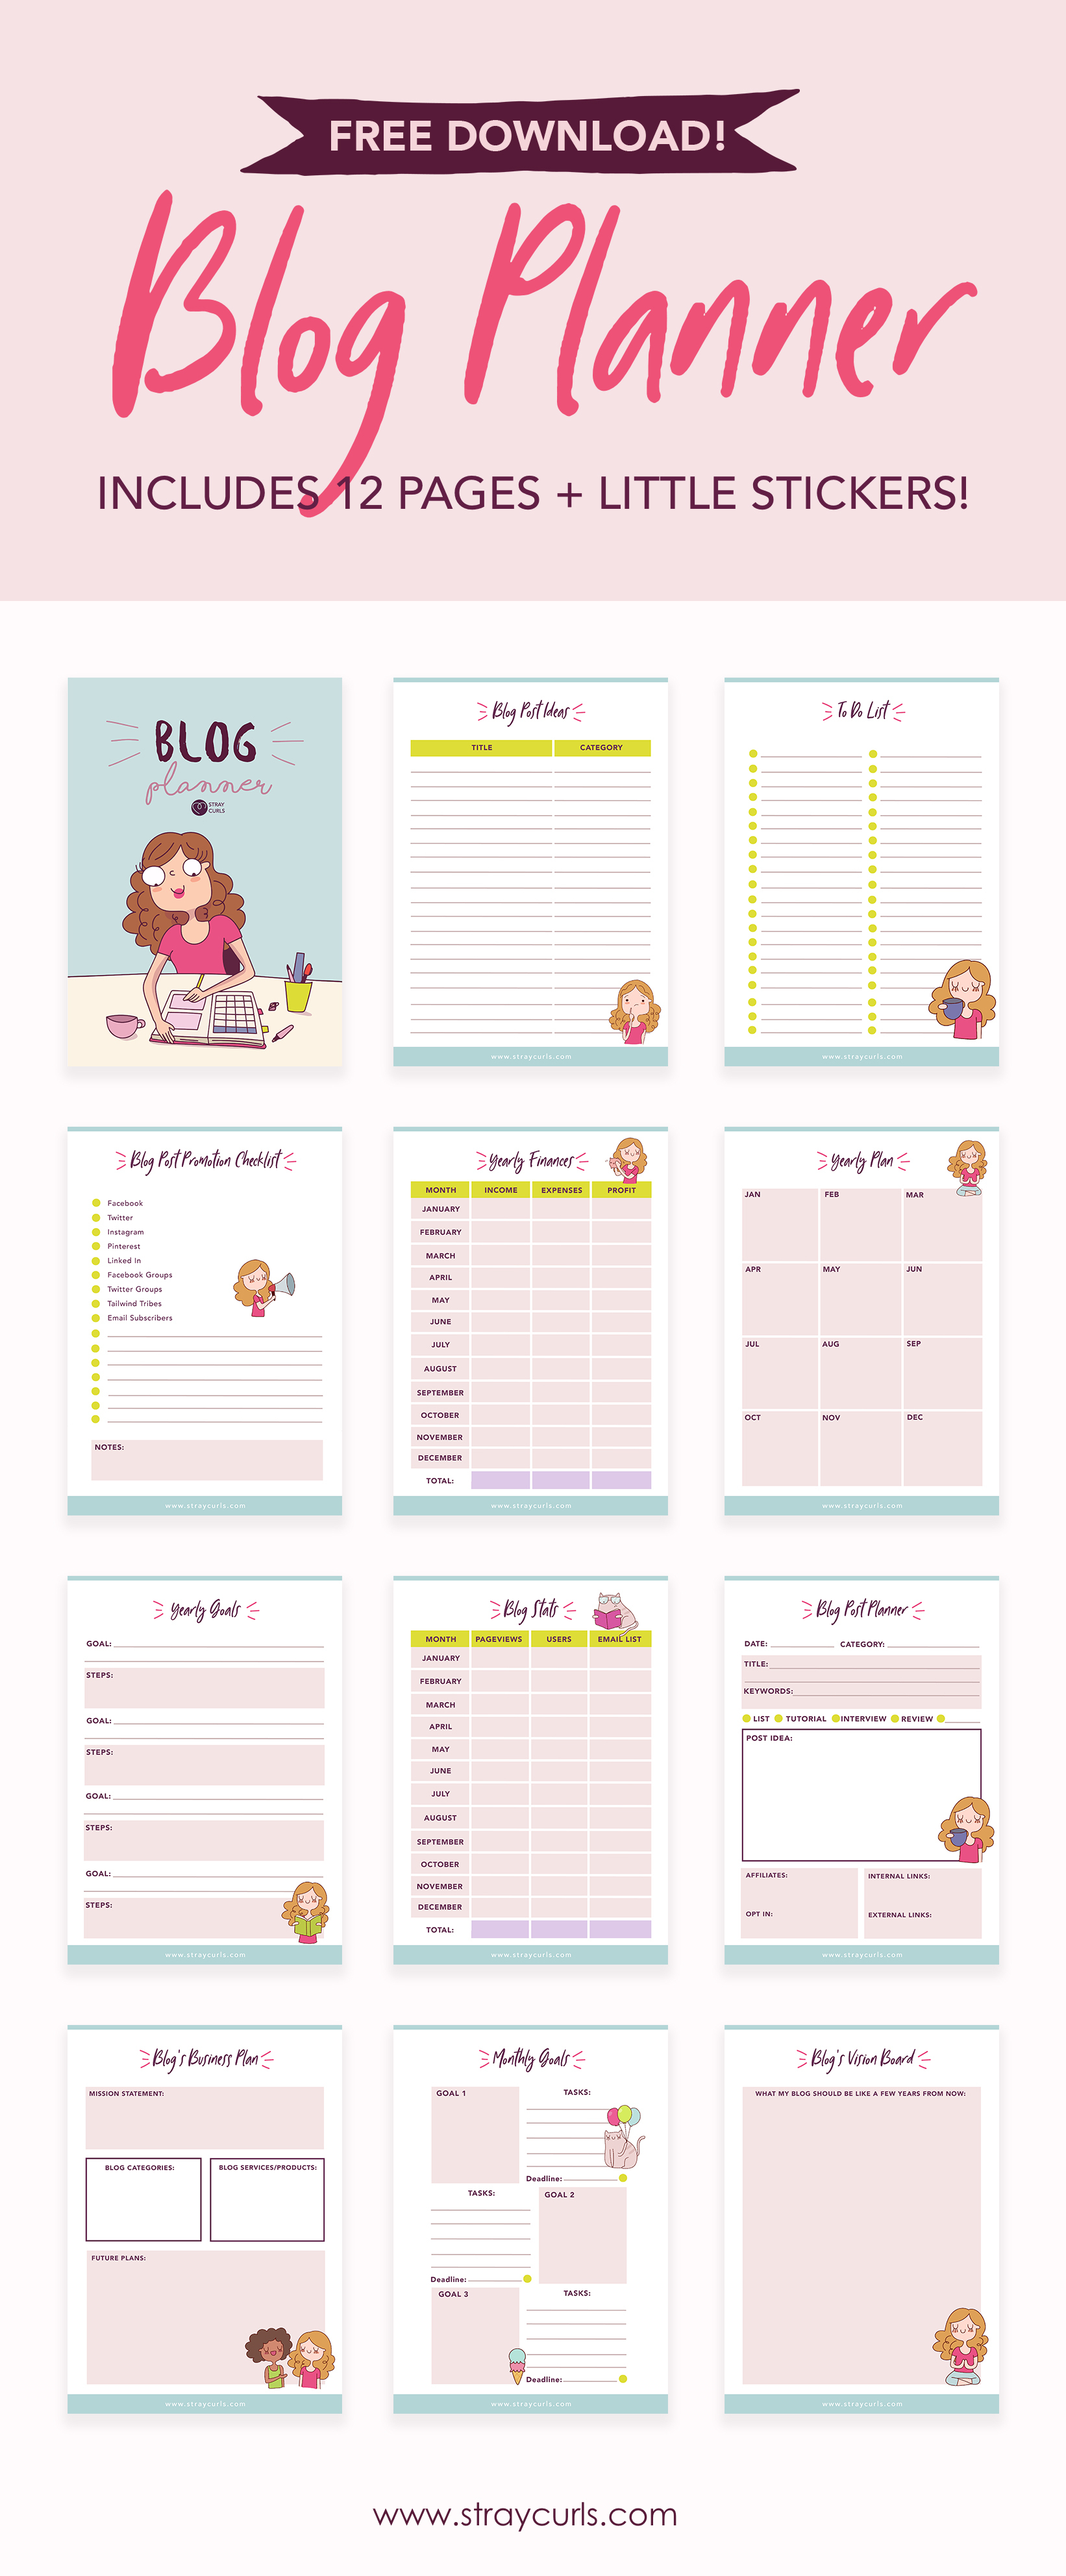 Free Download: 12 Page 2019 Blog Planner - Stray Curls - Free Printable Blog Planner